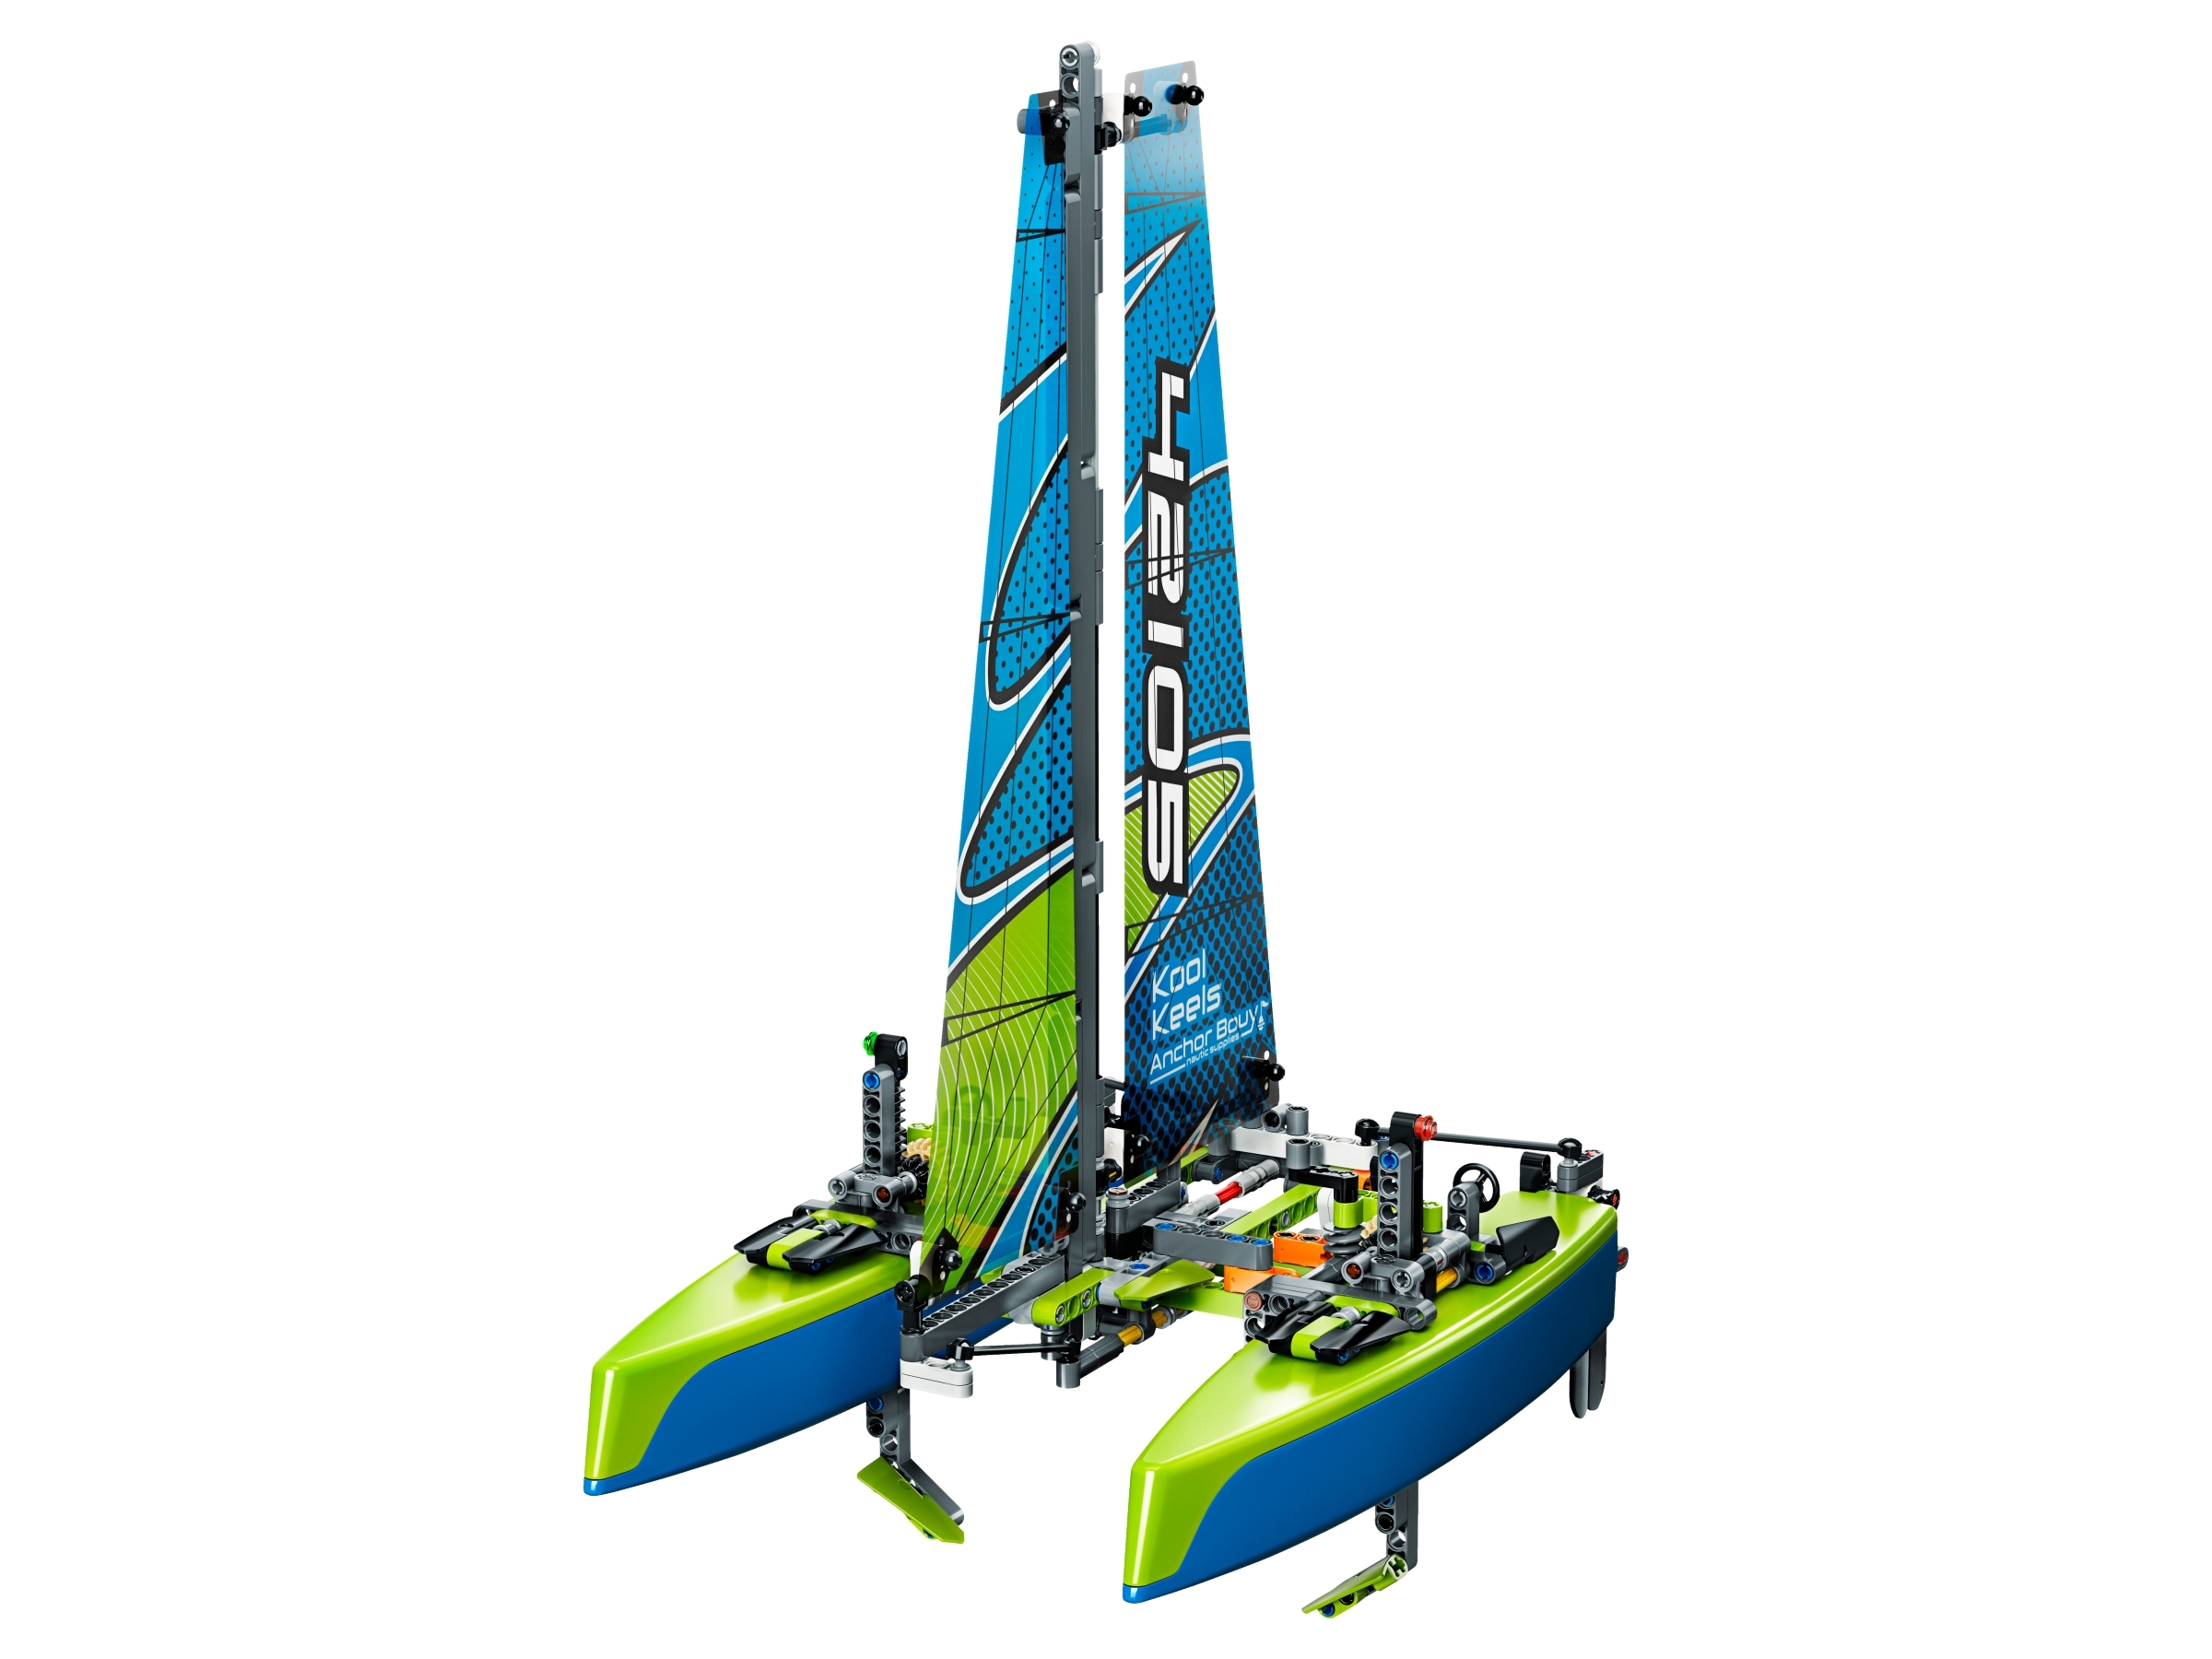 Catamaran 42105 | Technic™ | Buy online at the Official LEGO® Shop US